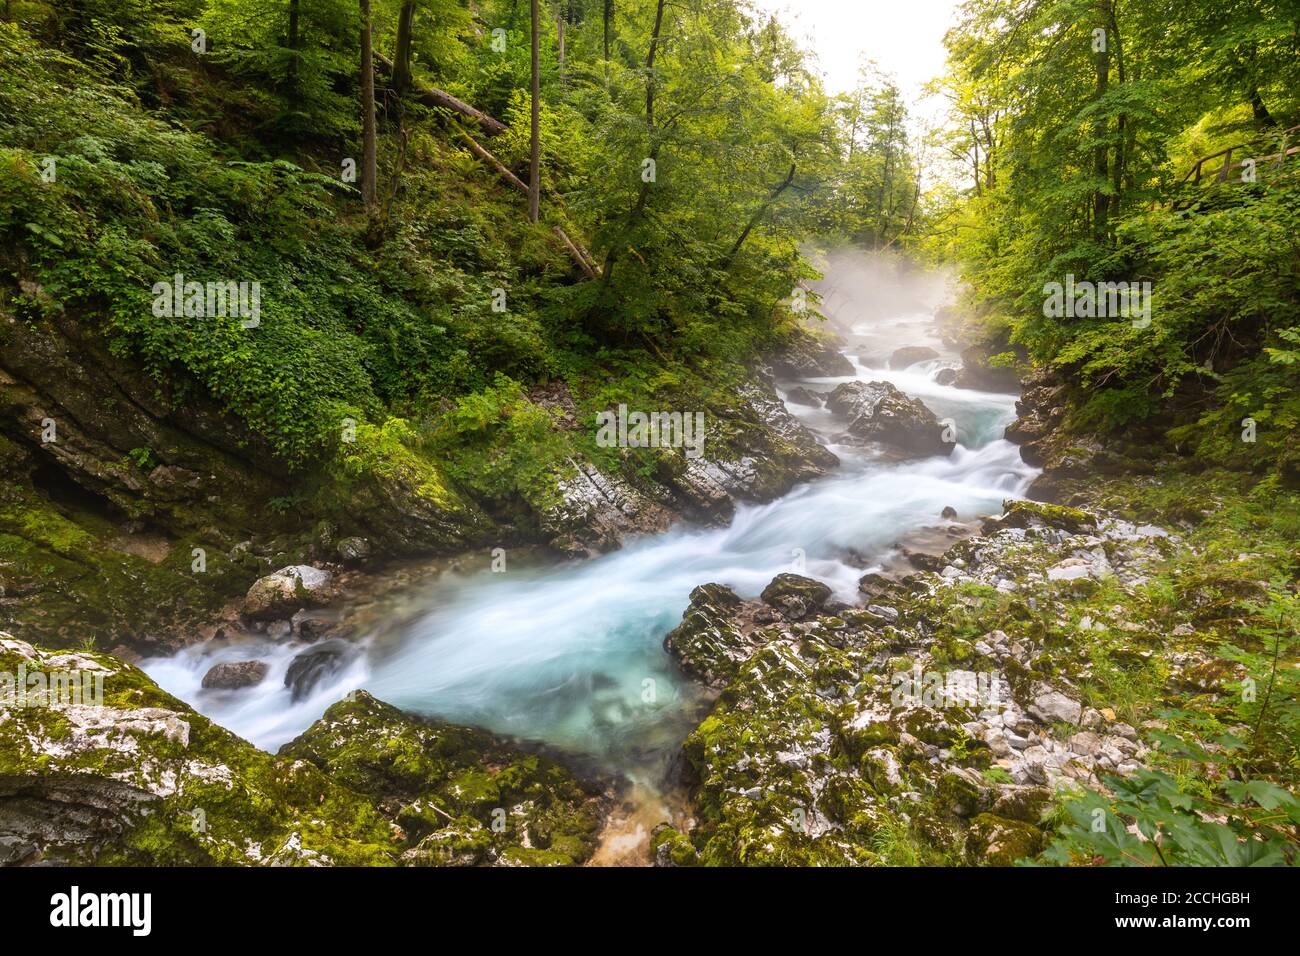 Wide angle view of the Slovenian gorge of Vintgar, with a torrent running between rocks and into rapids surrounded by vegetation Stock Photo